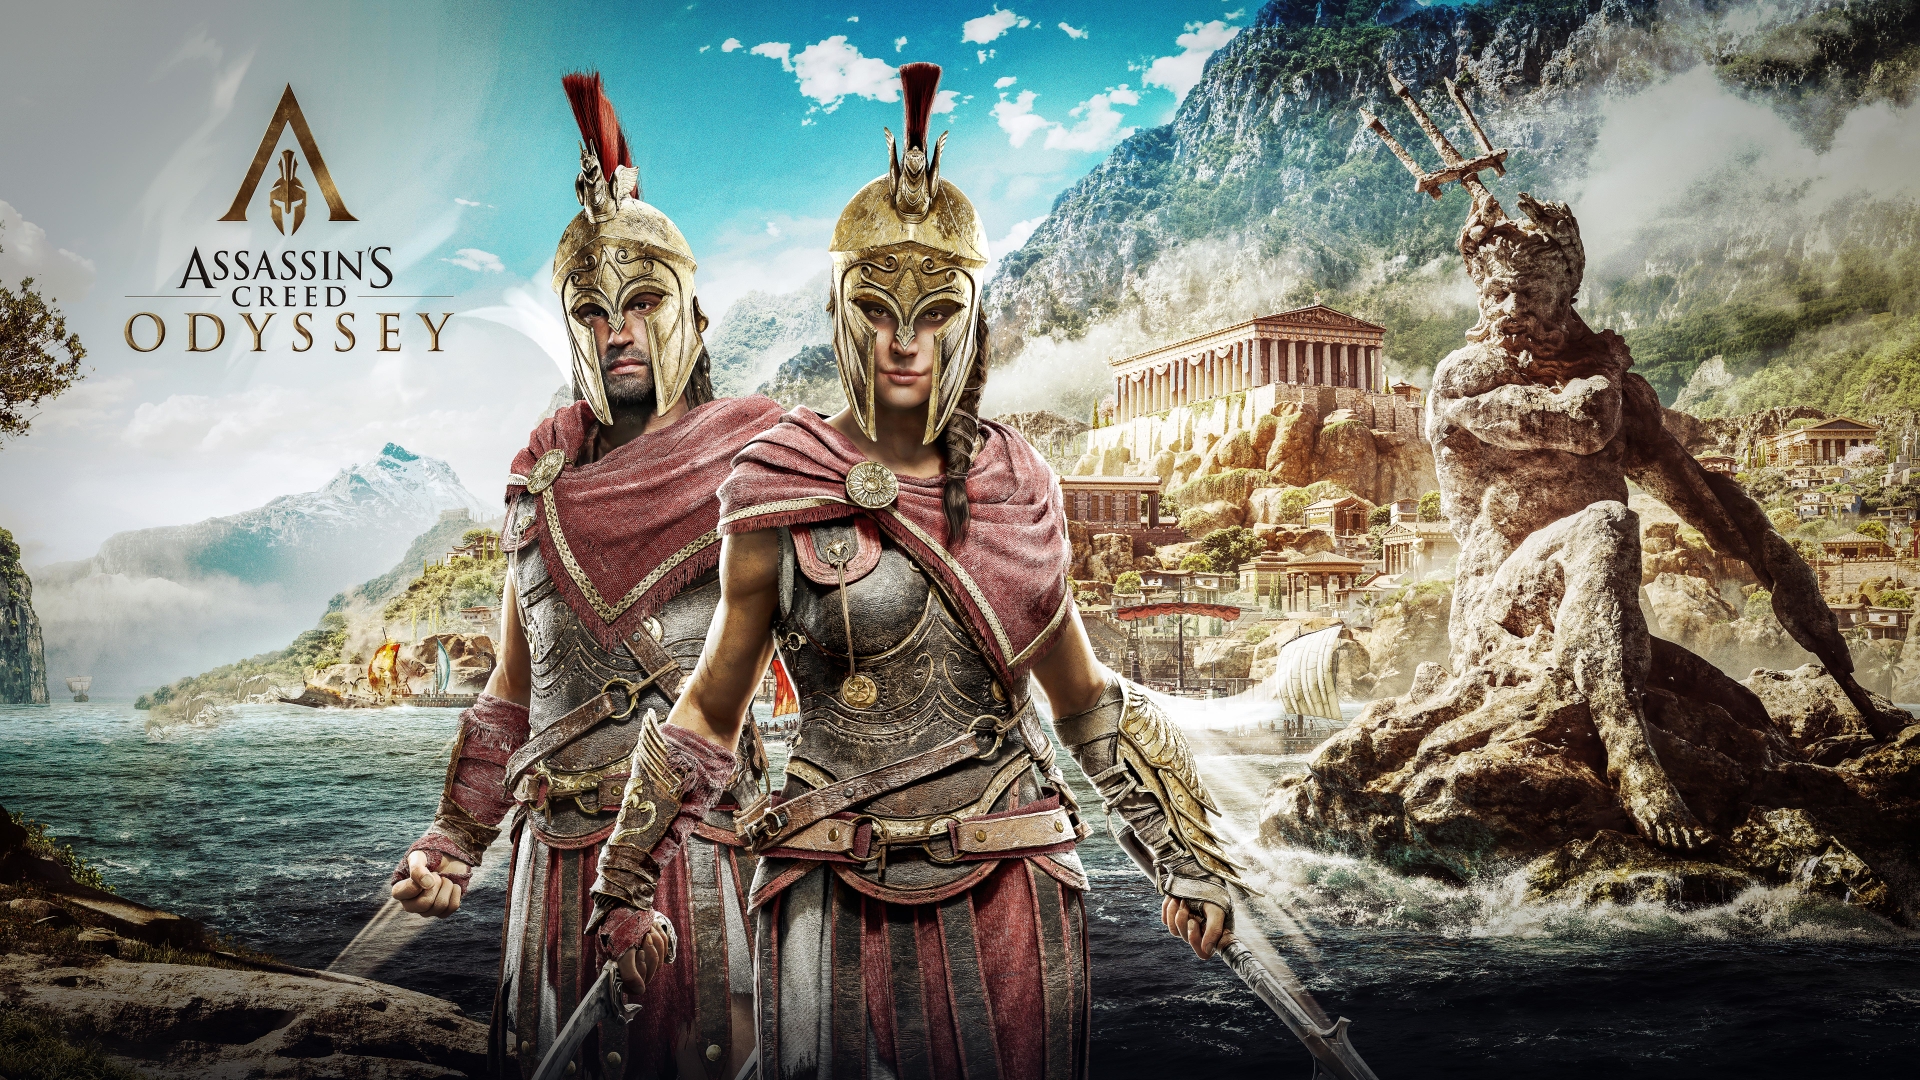 PS4 Assassins Creed: Odyssey